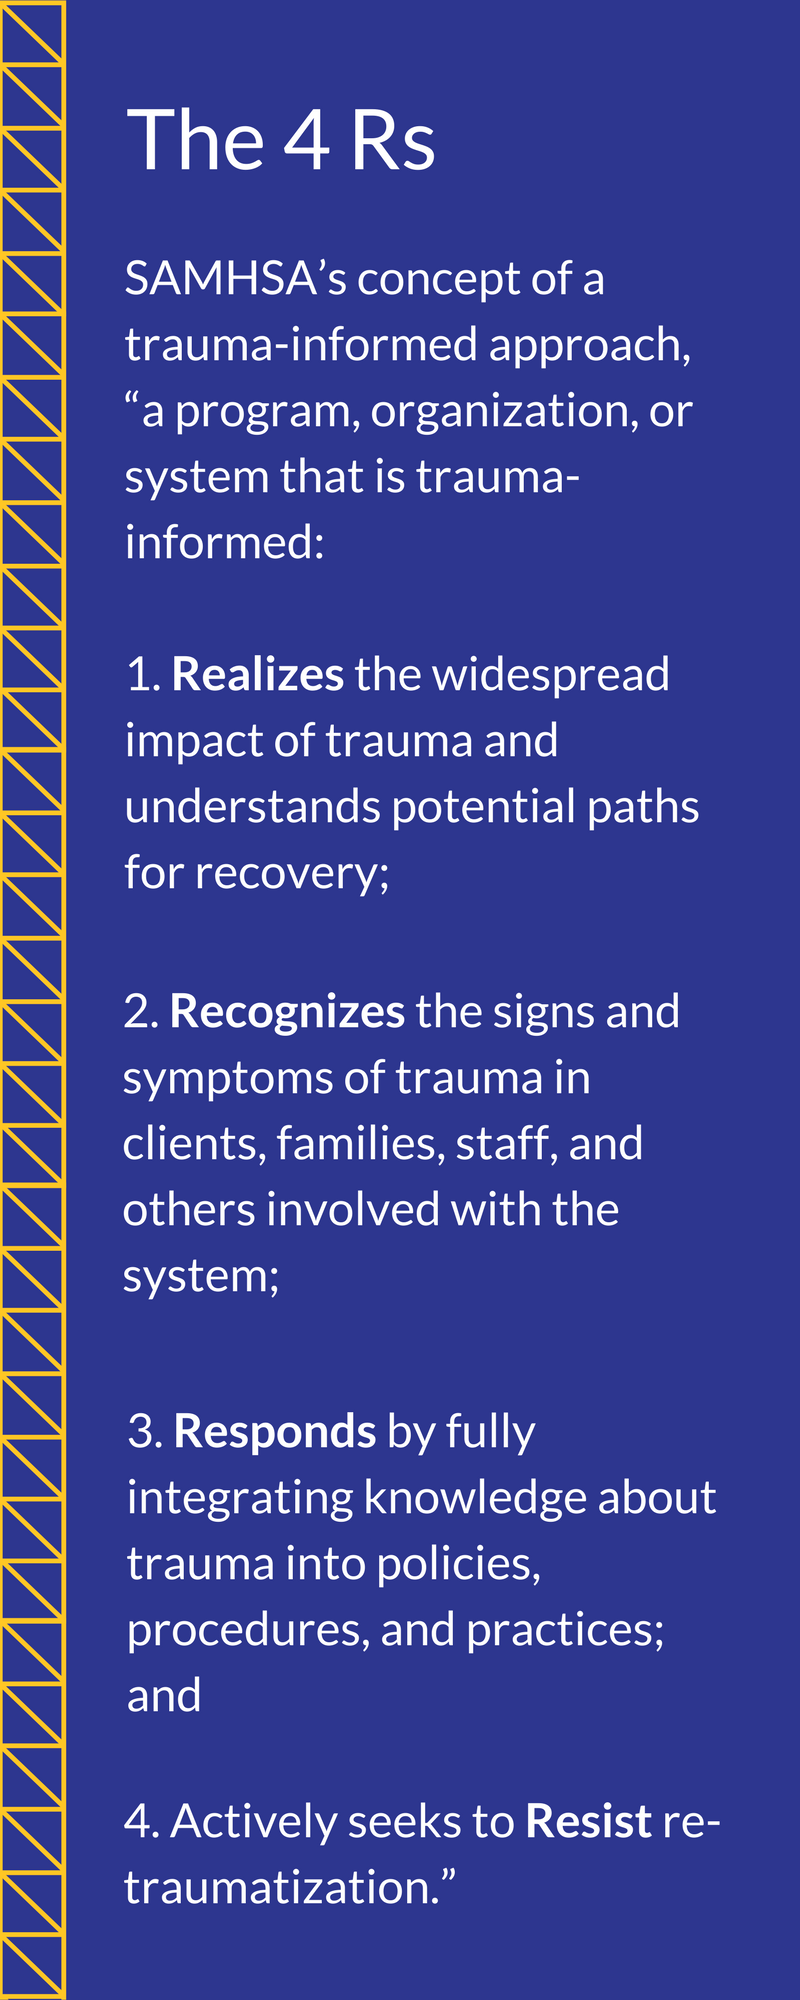 The Four Rs of a Trauma-Informed Approach